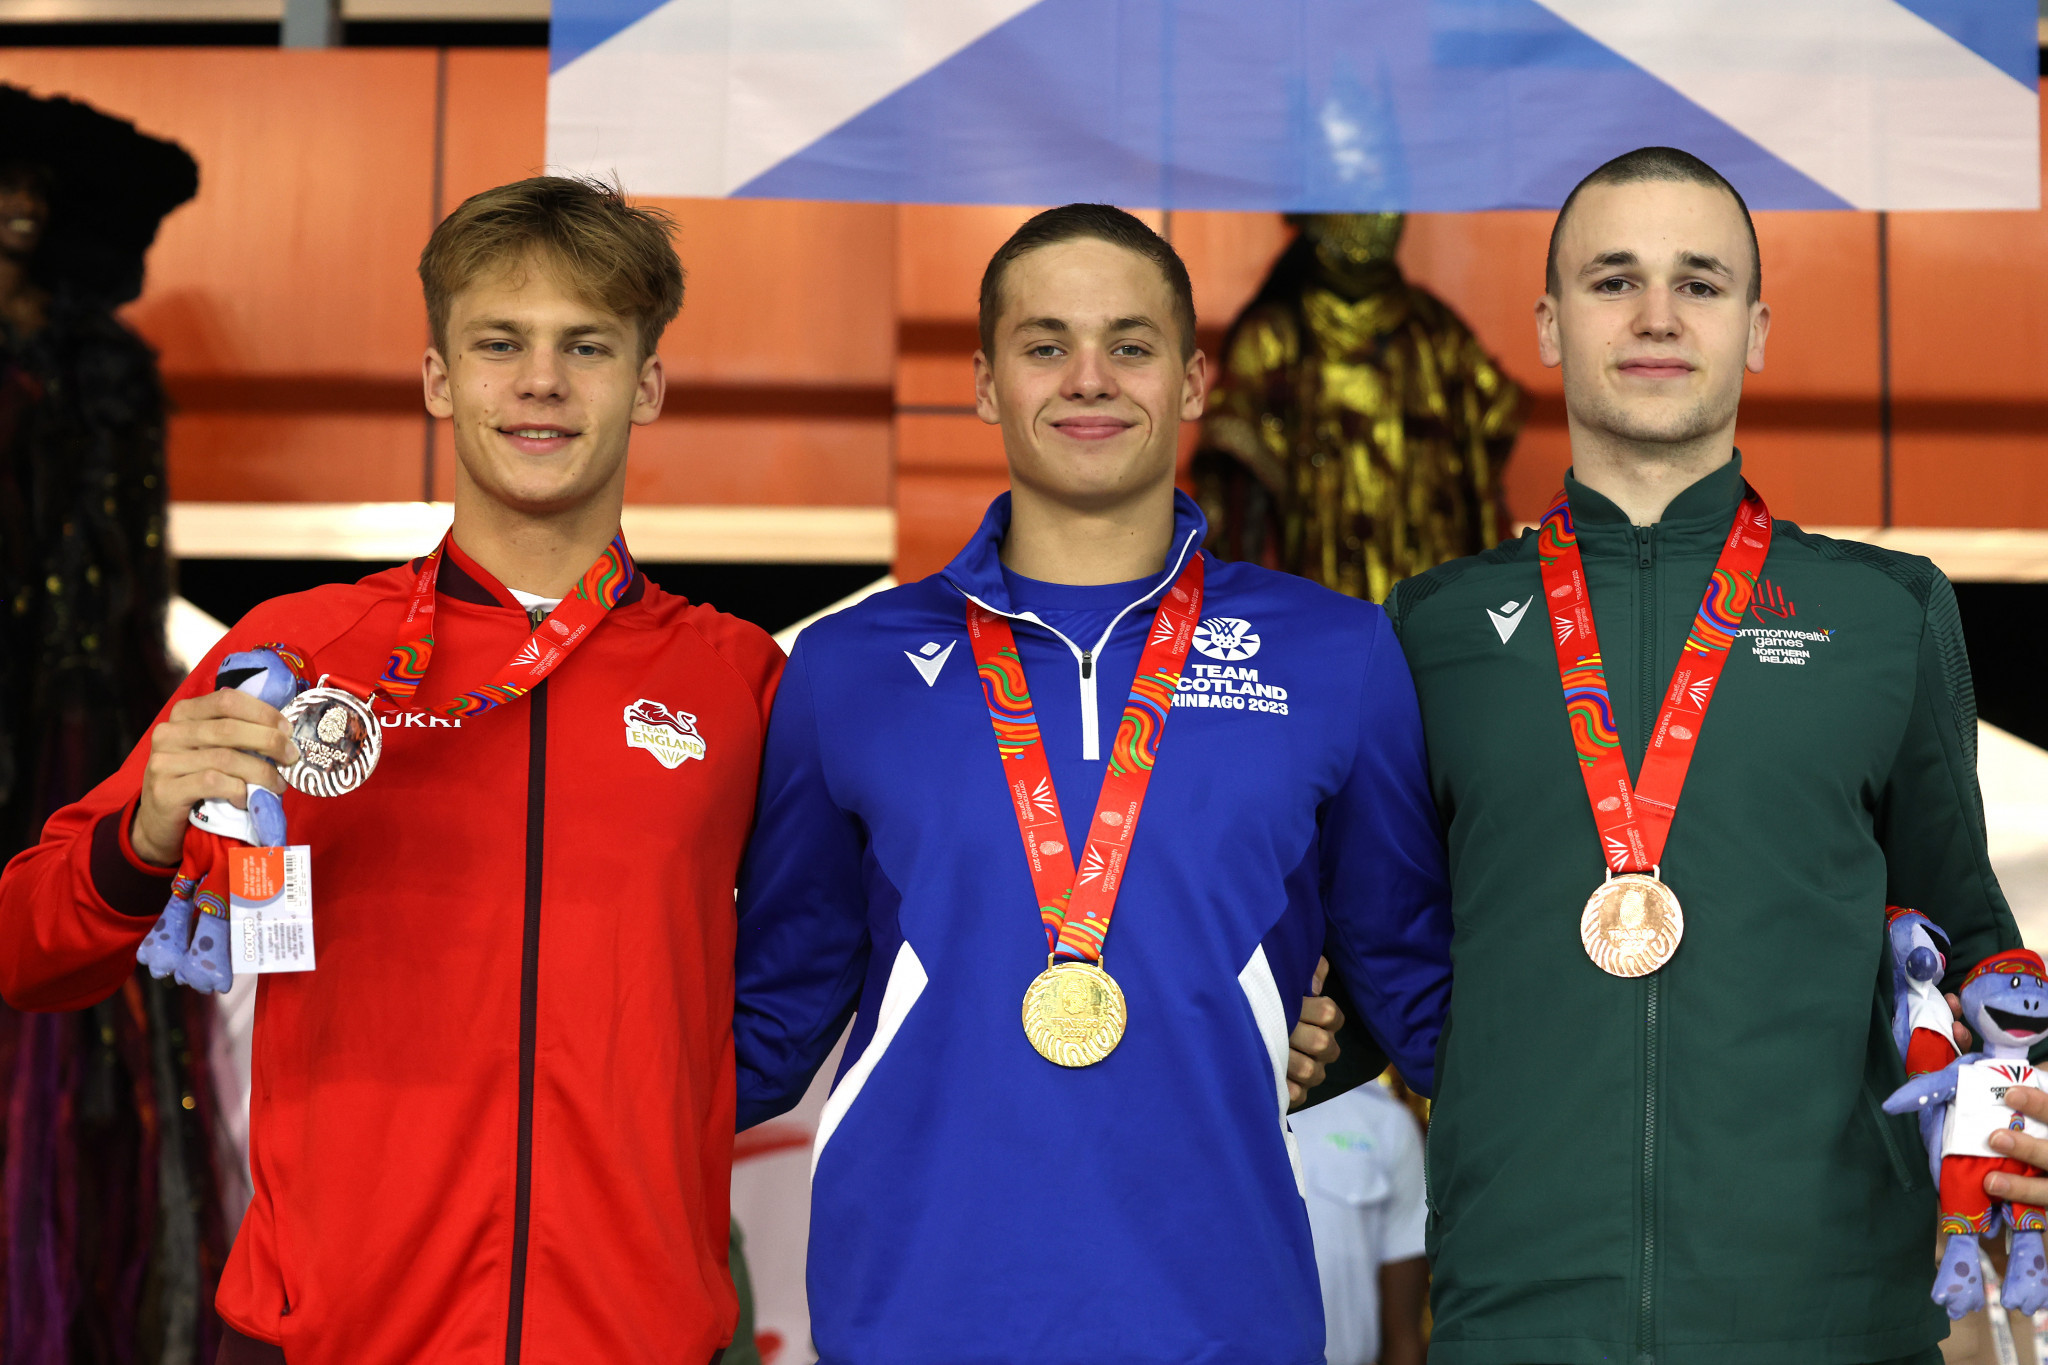 Scotland's Matthew Ward, centre, won his third swimming gold medal of Trinbago 2023 in the men's 200m backstroke ©Getty Images